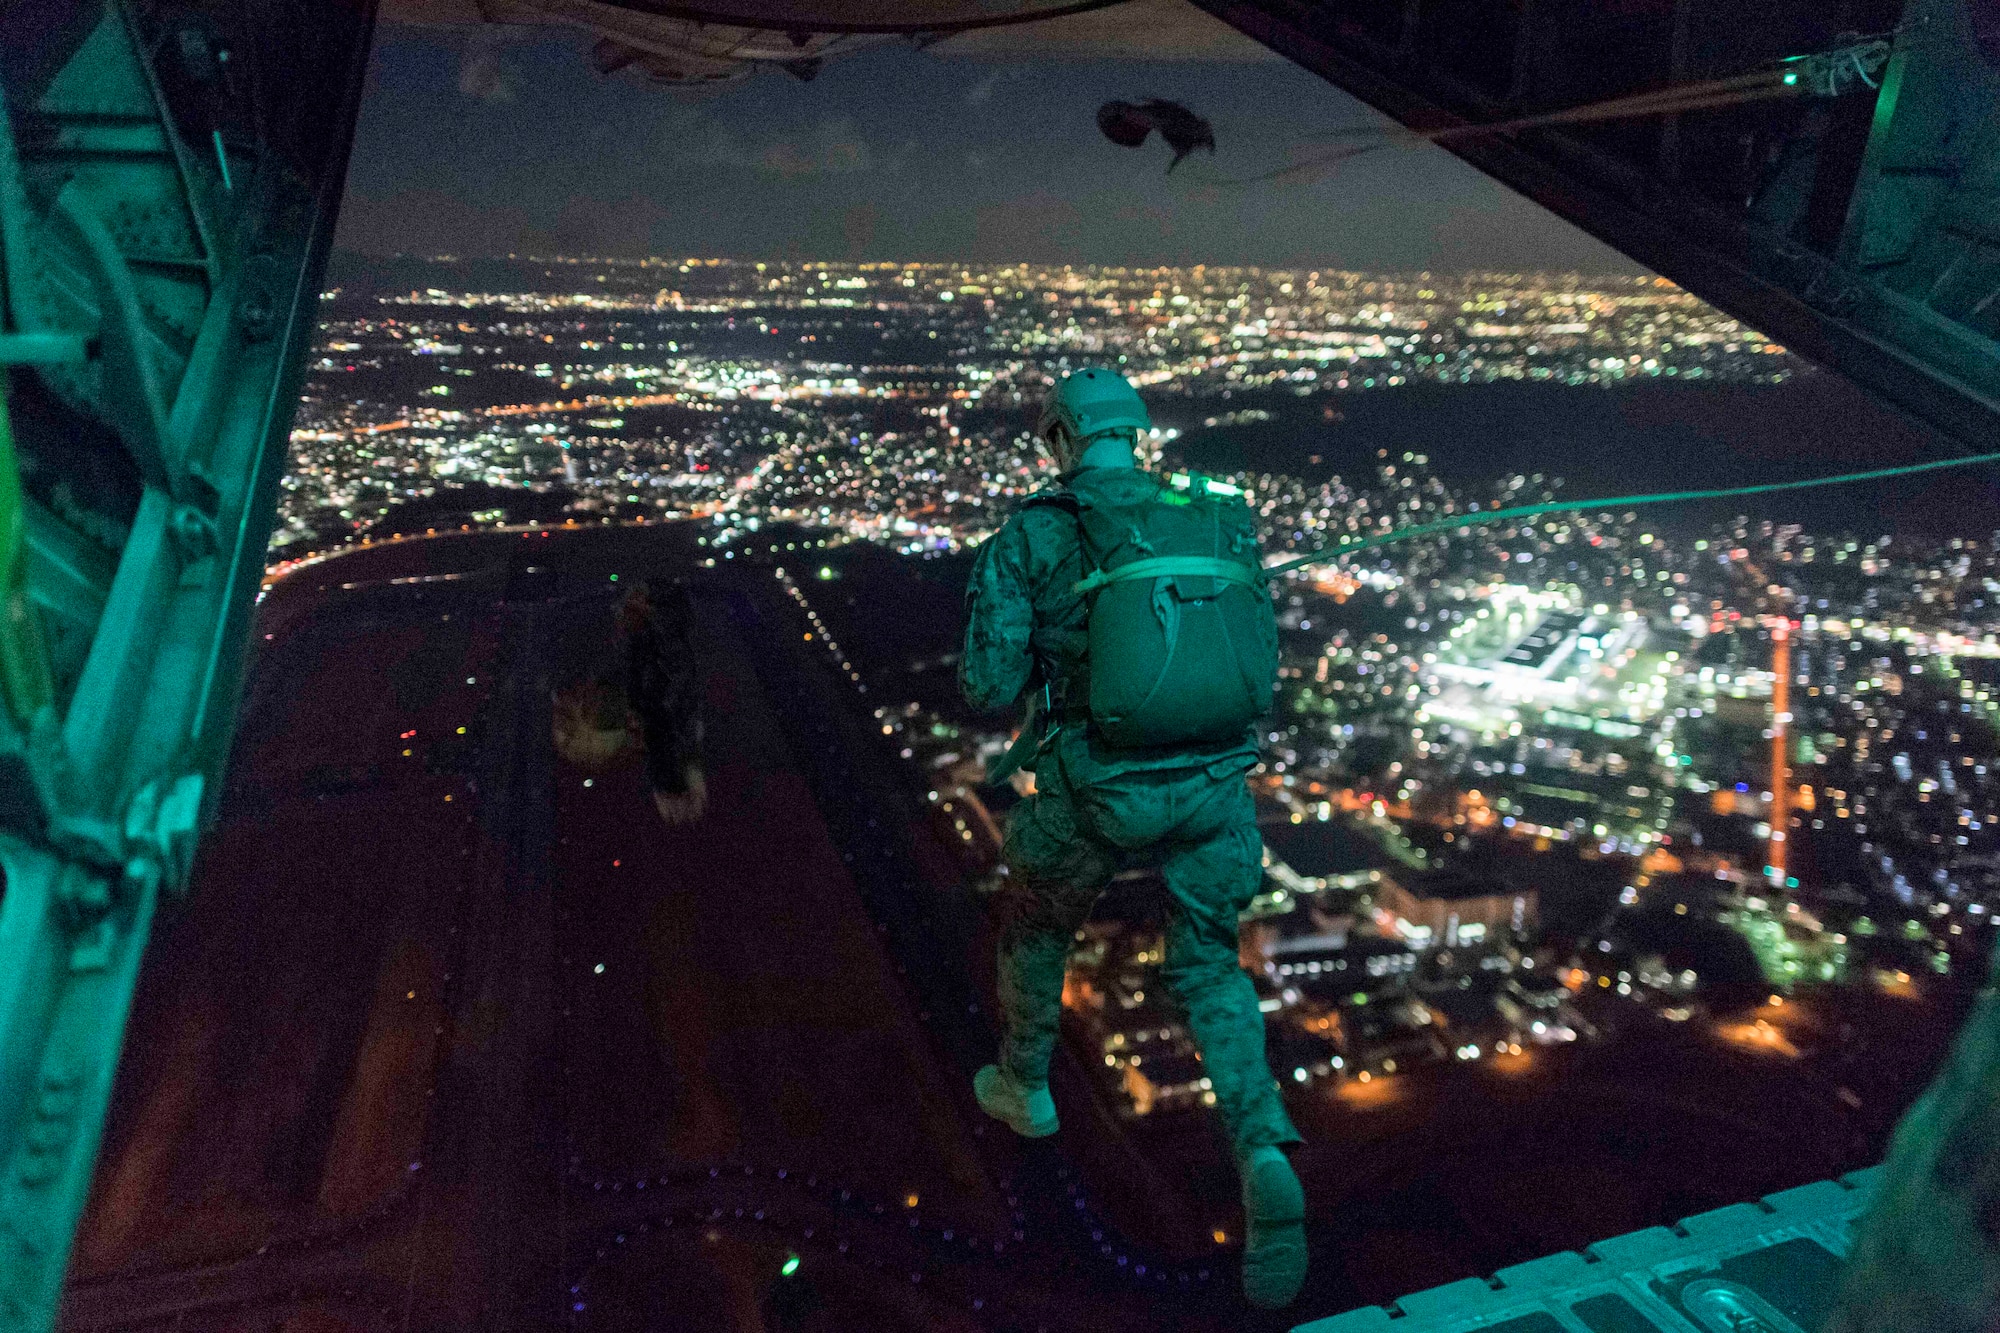 A U.S. Marine from the 3rd Reconnaissance Battalion, 3rd Marine Division, III Marine Expeditionary Force jumps from the back of a U.S. Air Force C-130 Hercules during jump week at Yokota Air Base, Japan, Jan. 11, 2017. The training not only allowed the Marines to practice jumping, but it also allowed the Yokota aircrews to practice flight tactics and timed-package drops. (U.S. Air Force photo by Staff Sgt. Michael Washburn/Released)